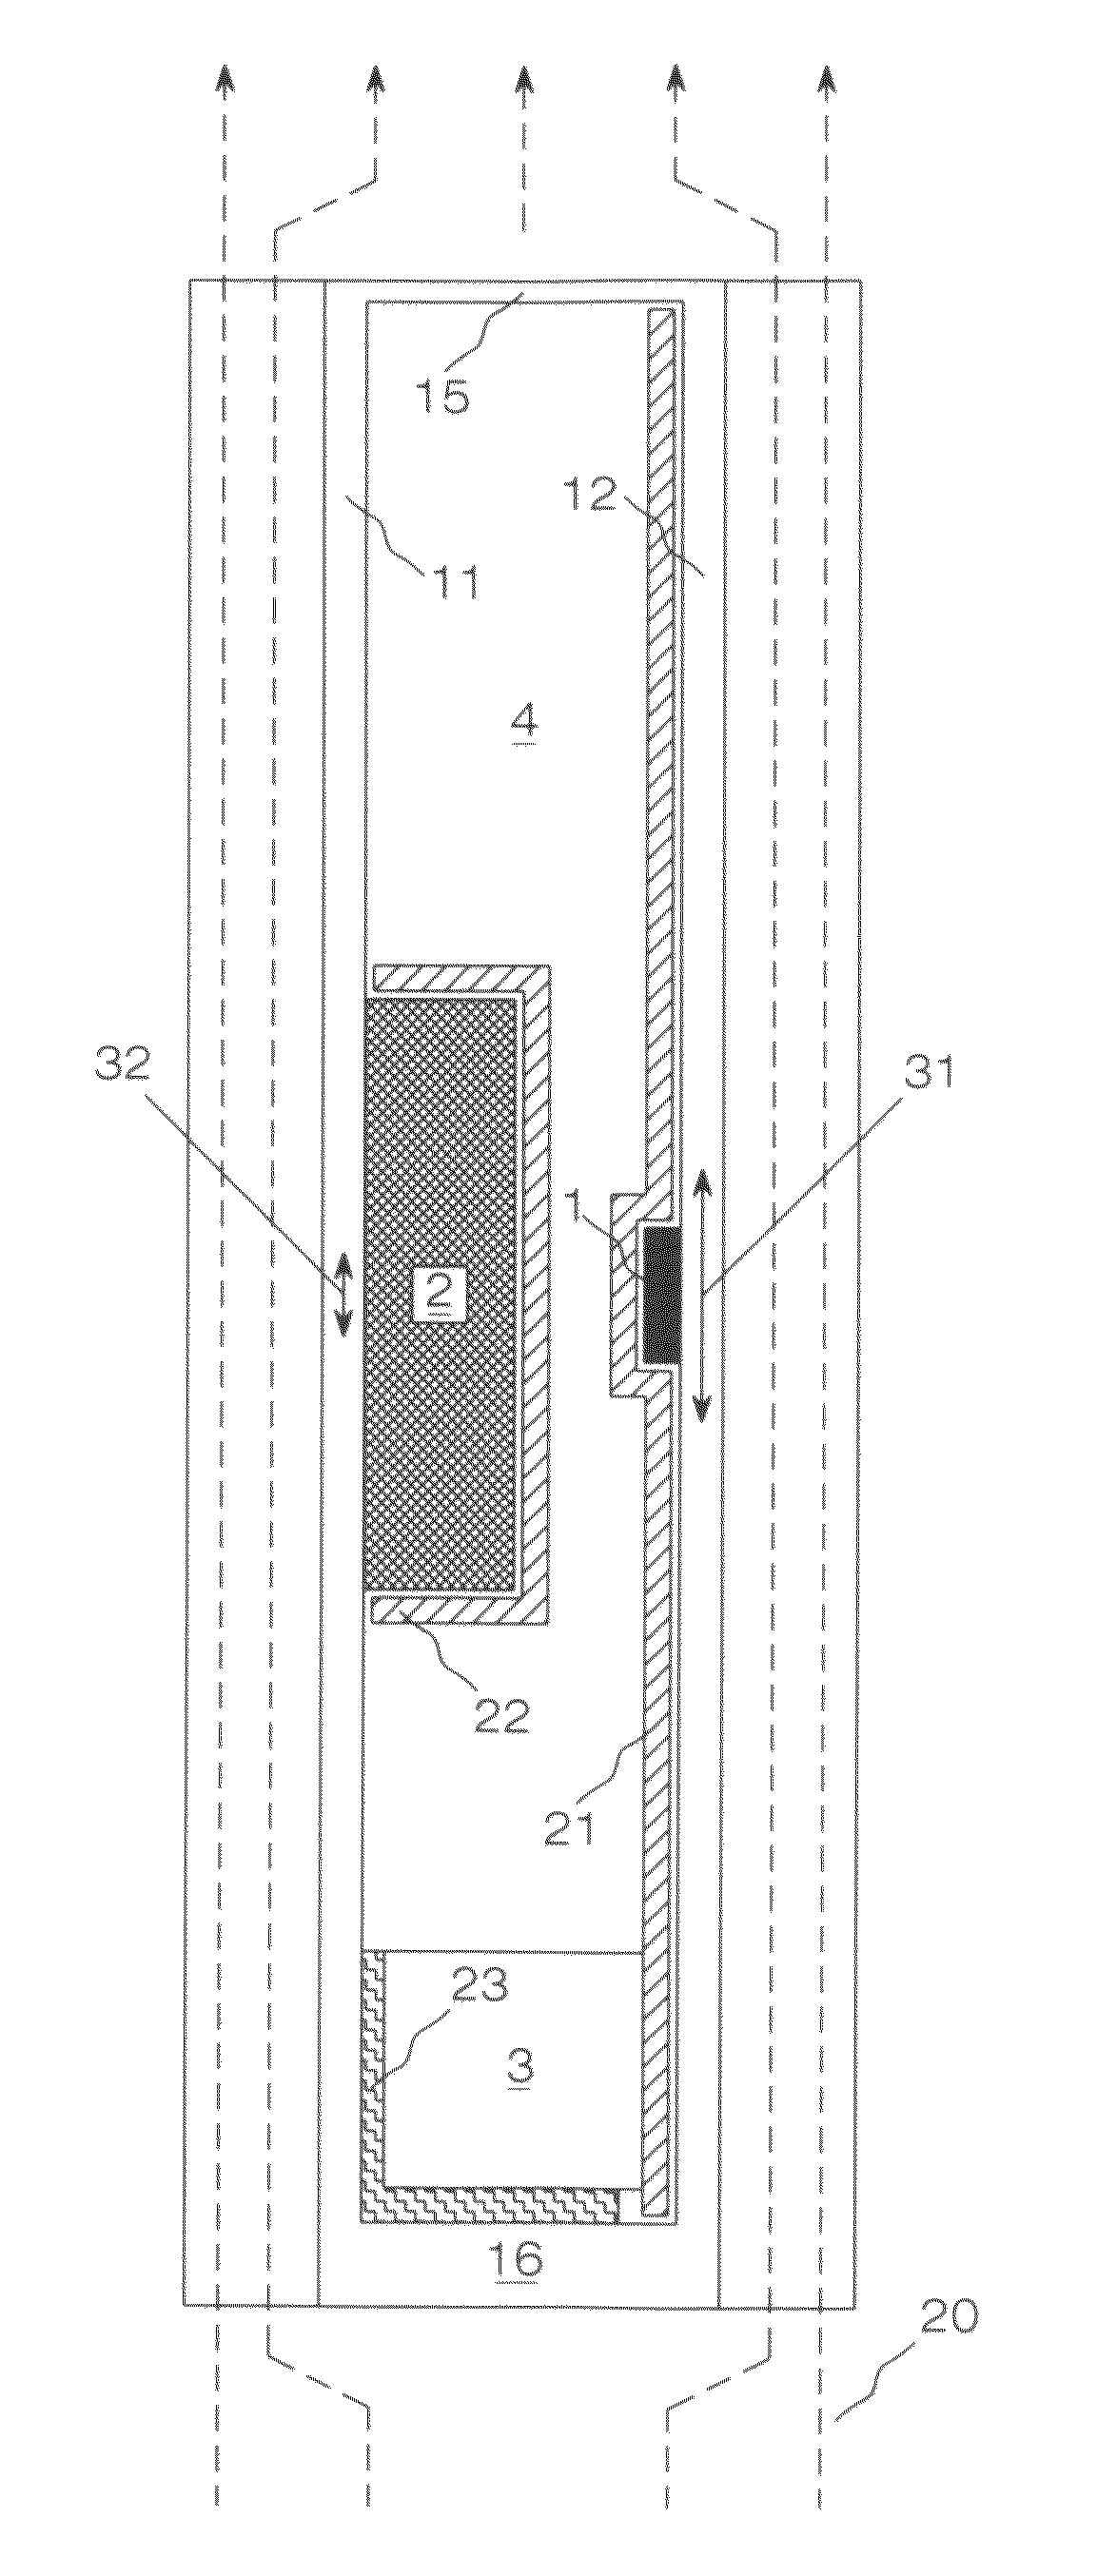 Power converter with linear distribution of heat sources